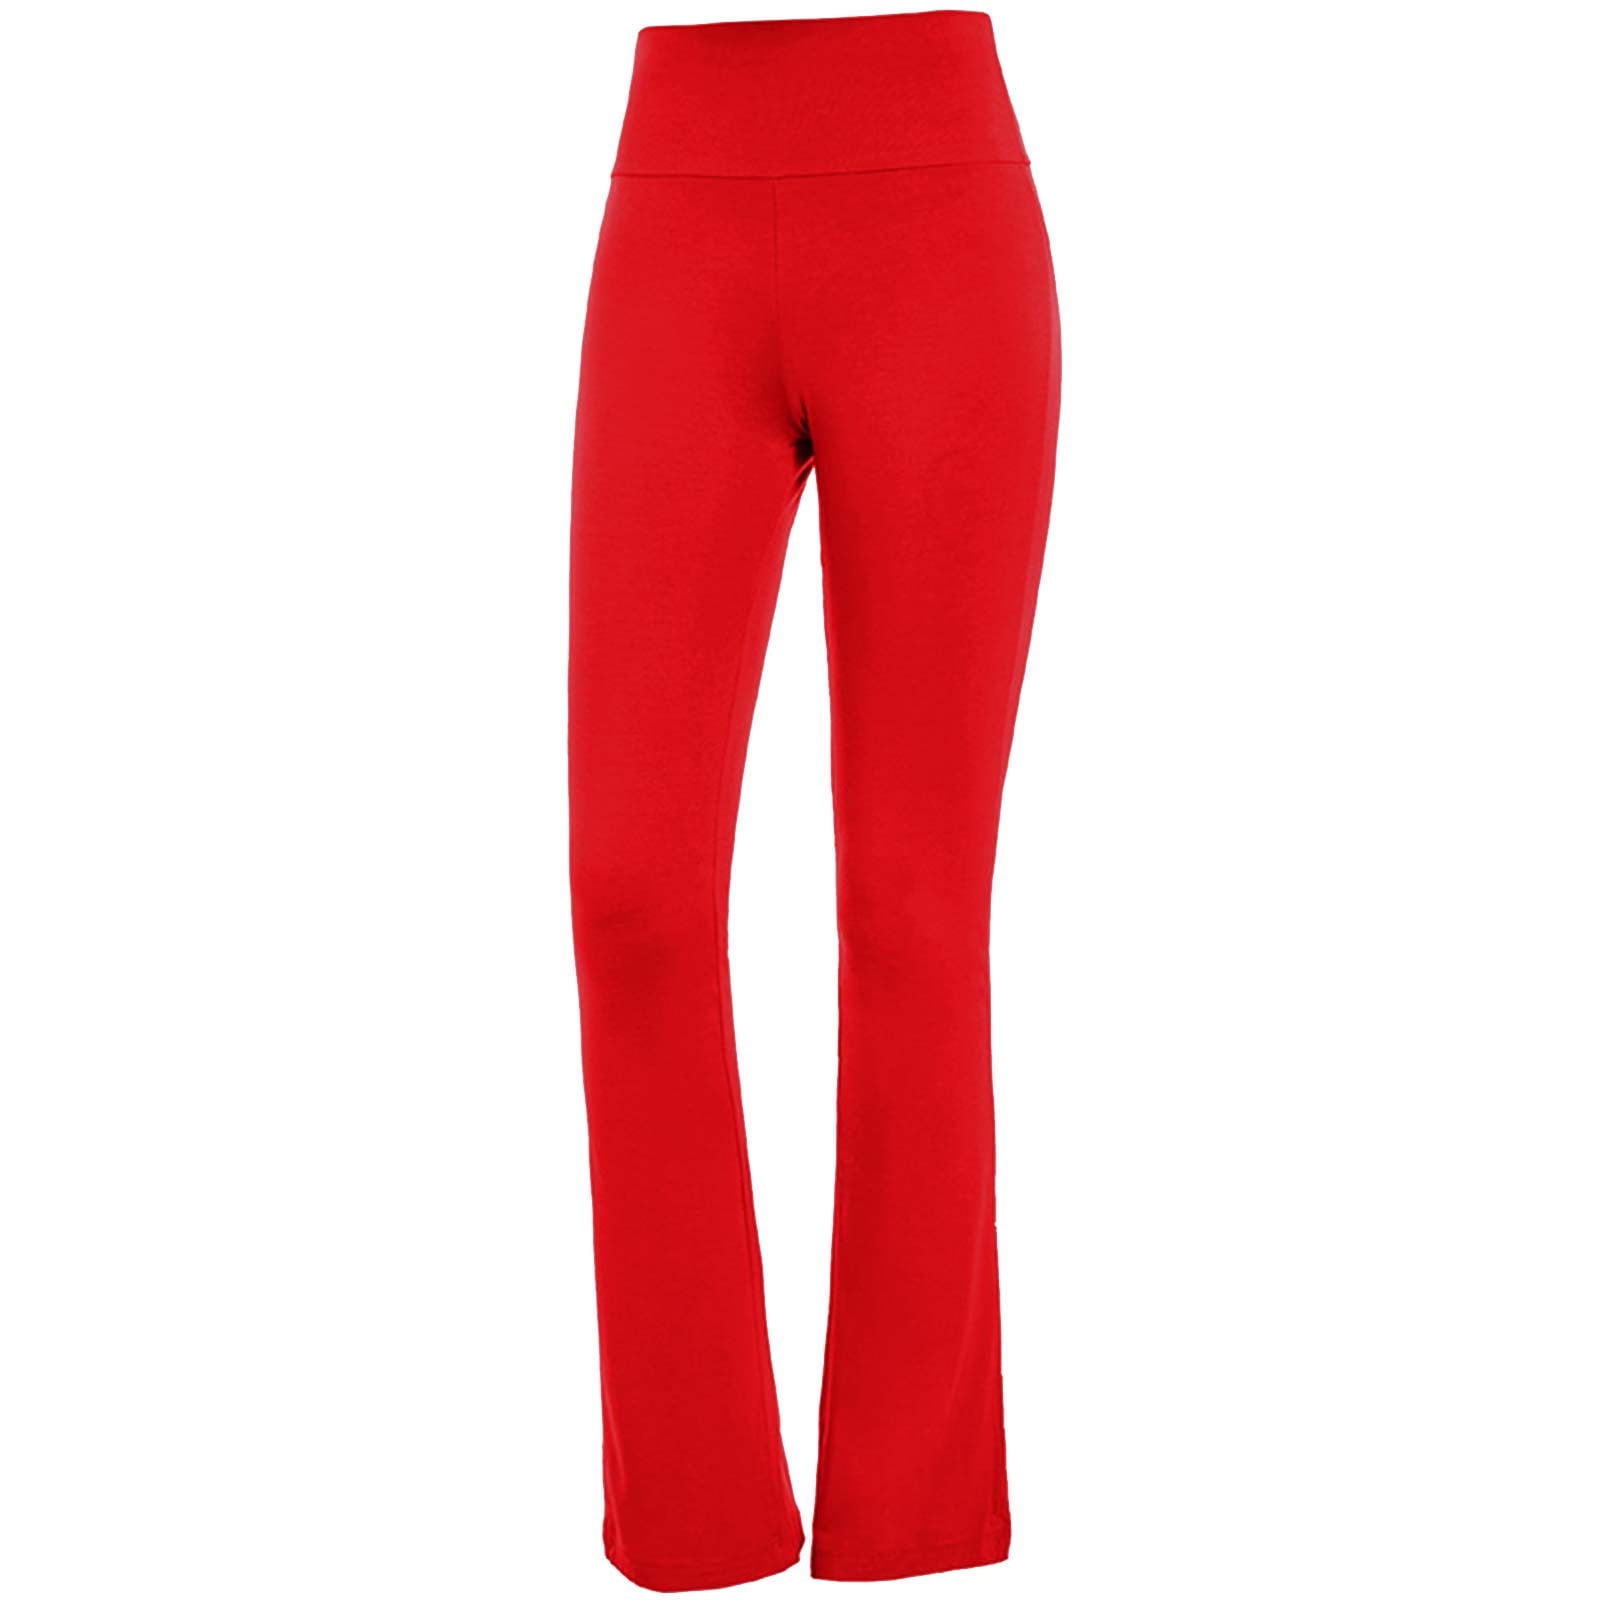 Long Yoga Pants for Women Tall Solid Color Flare Elastic High Waist Wrokout  Gym Pants Soft Athletic Plus Leggings(Red,L)